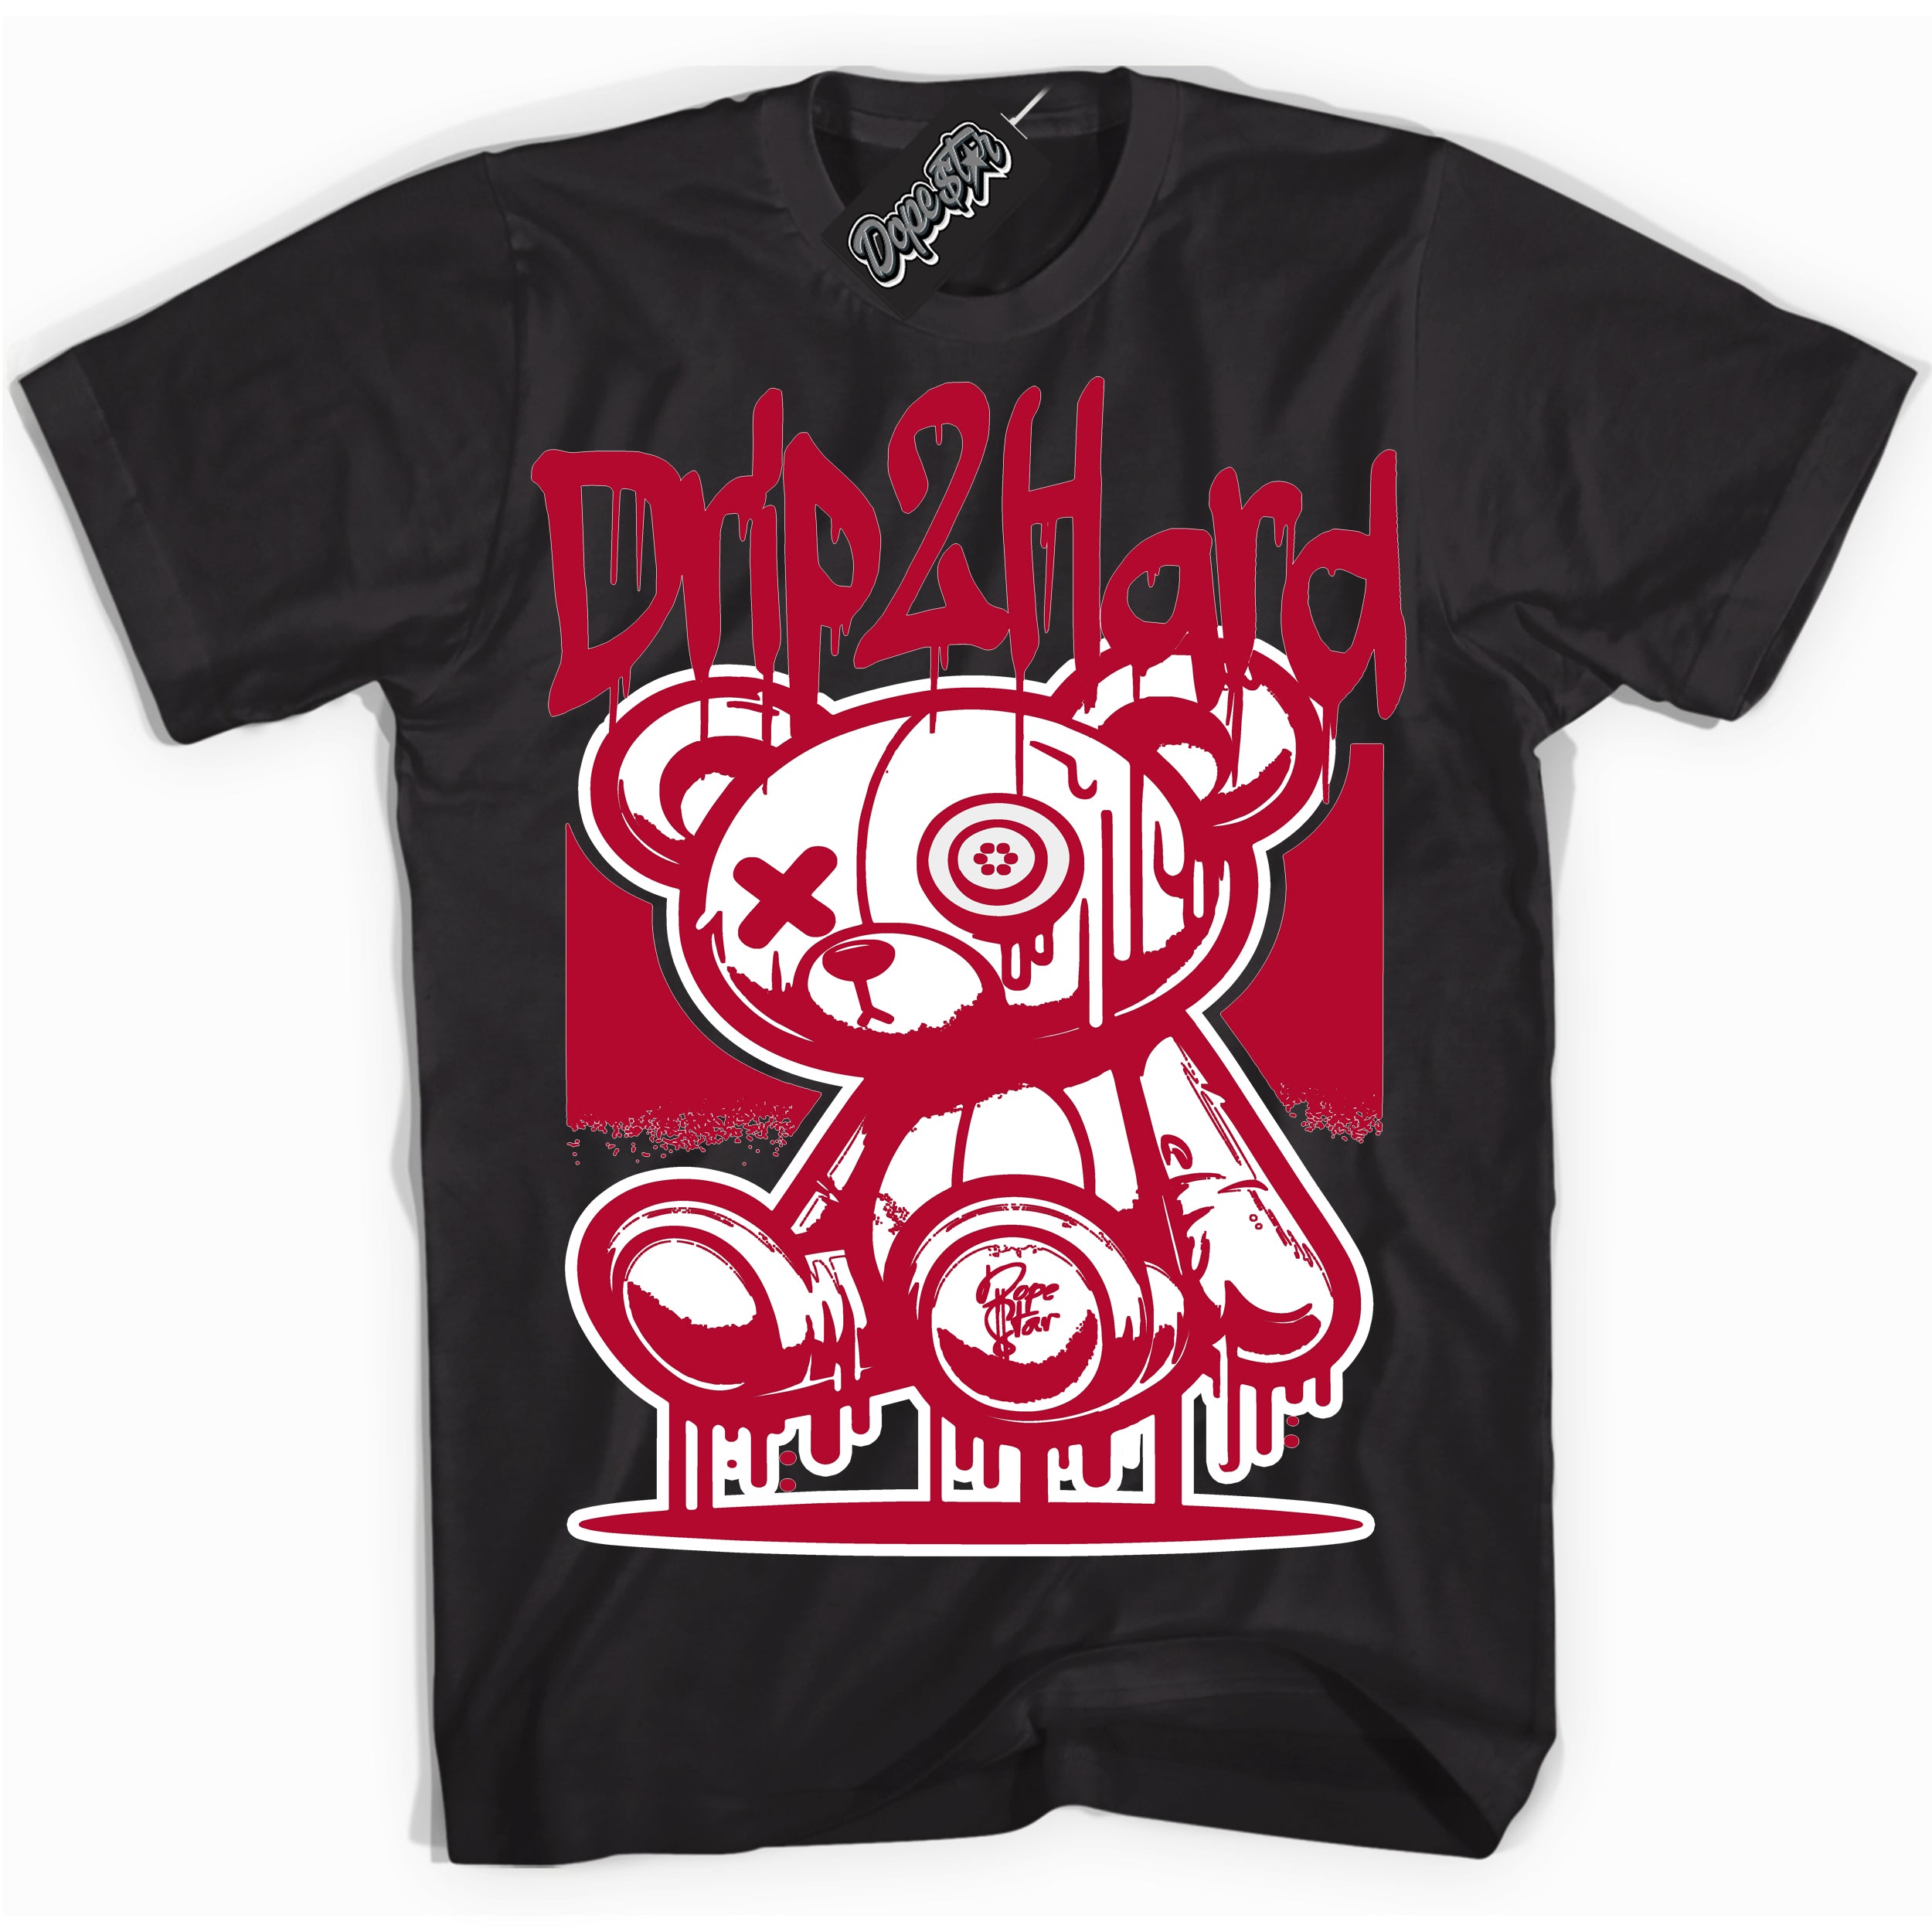 Cool Black graphic tee with “ Drip 2 Hard ” design, that perfectly matches University Red 1s